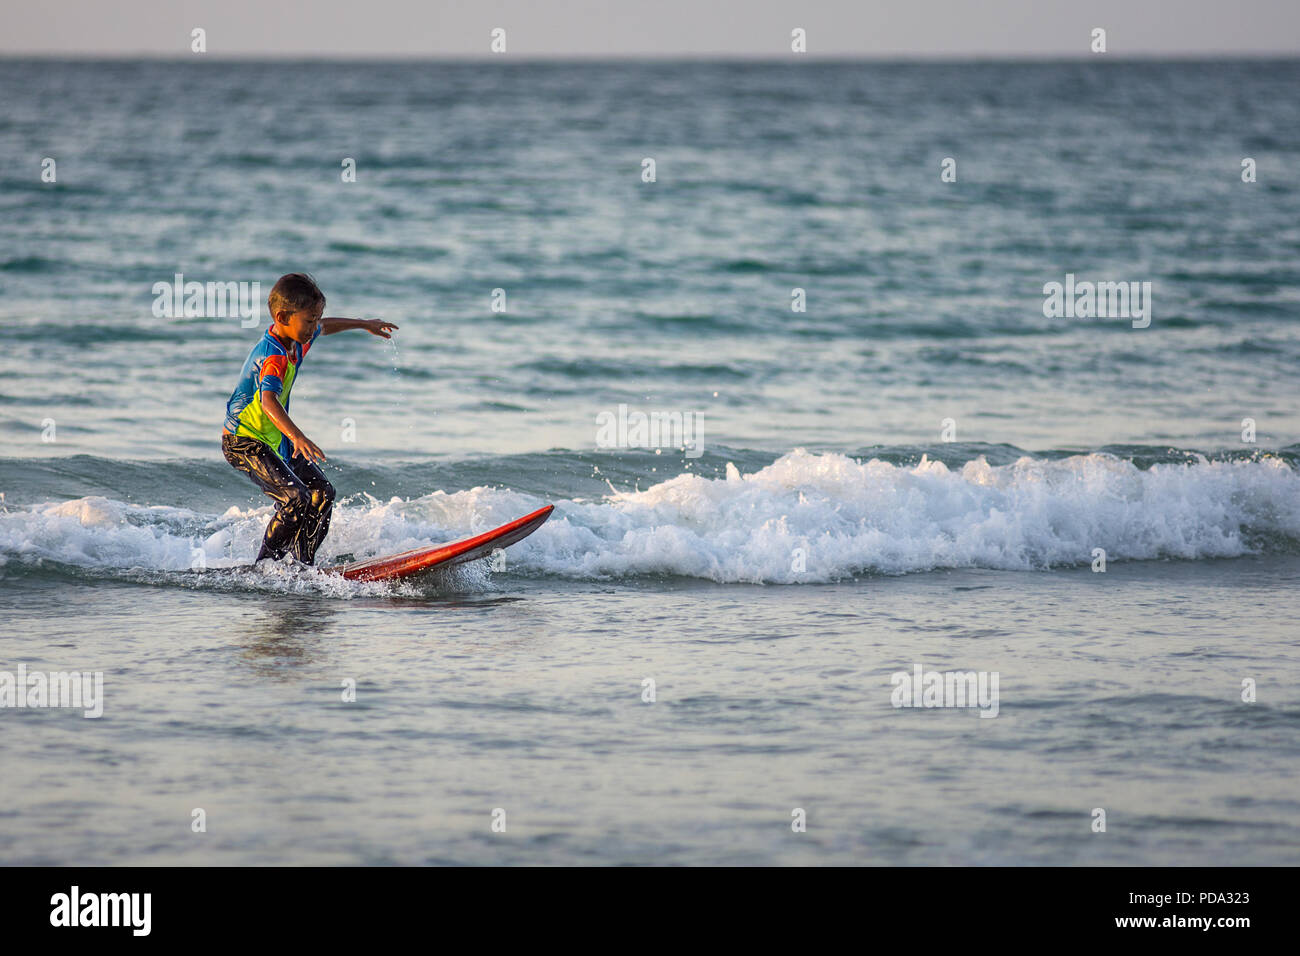 A young local boy practices his surfing skills on a small wave on a surf board donated by visiting westerns at the Tip of Borneo, Borneo, Malaysia. Stock Photo